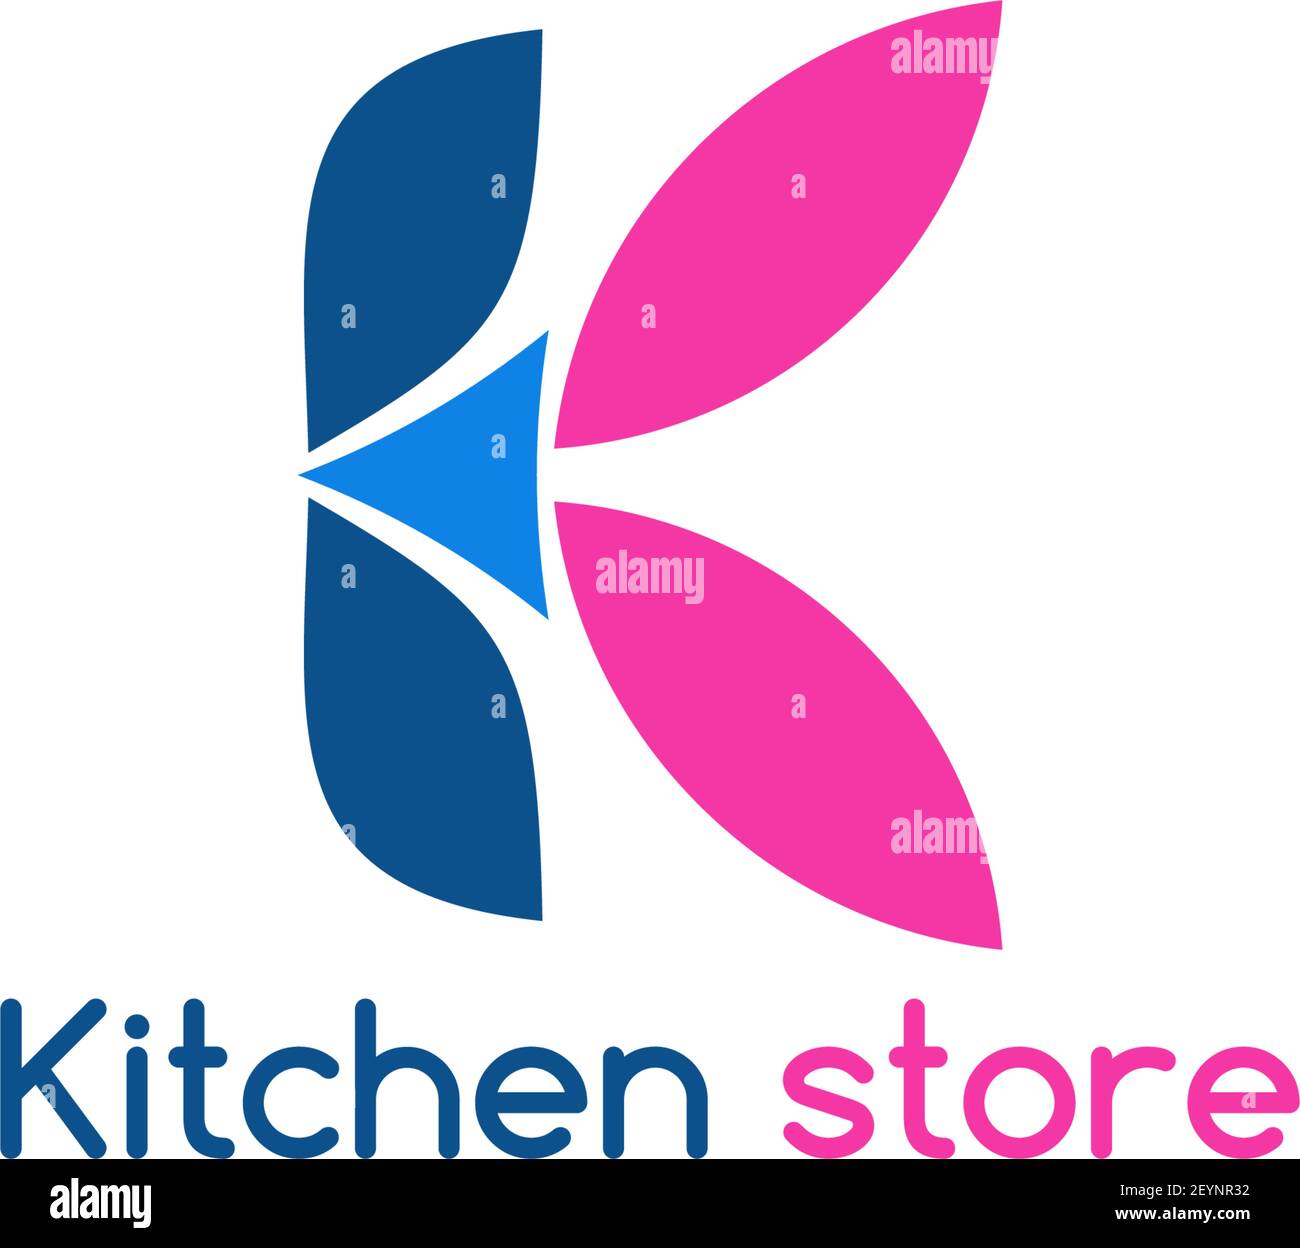 Kitchen store vector sign isolated on white background. Creative design for kitchen shop or market. Concept of kitchen shop, house appliances and home Stock Vector